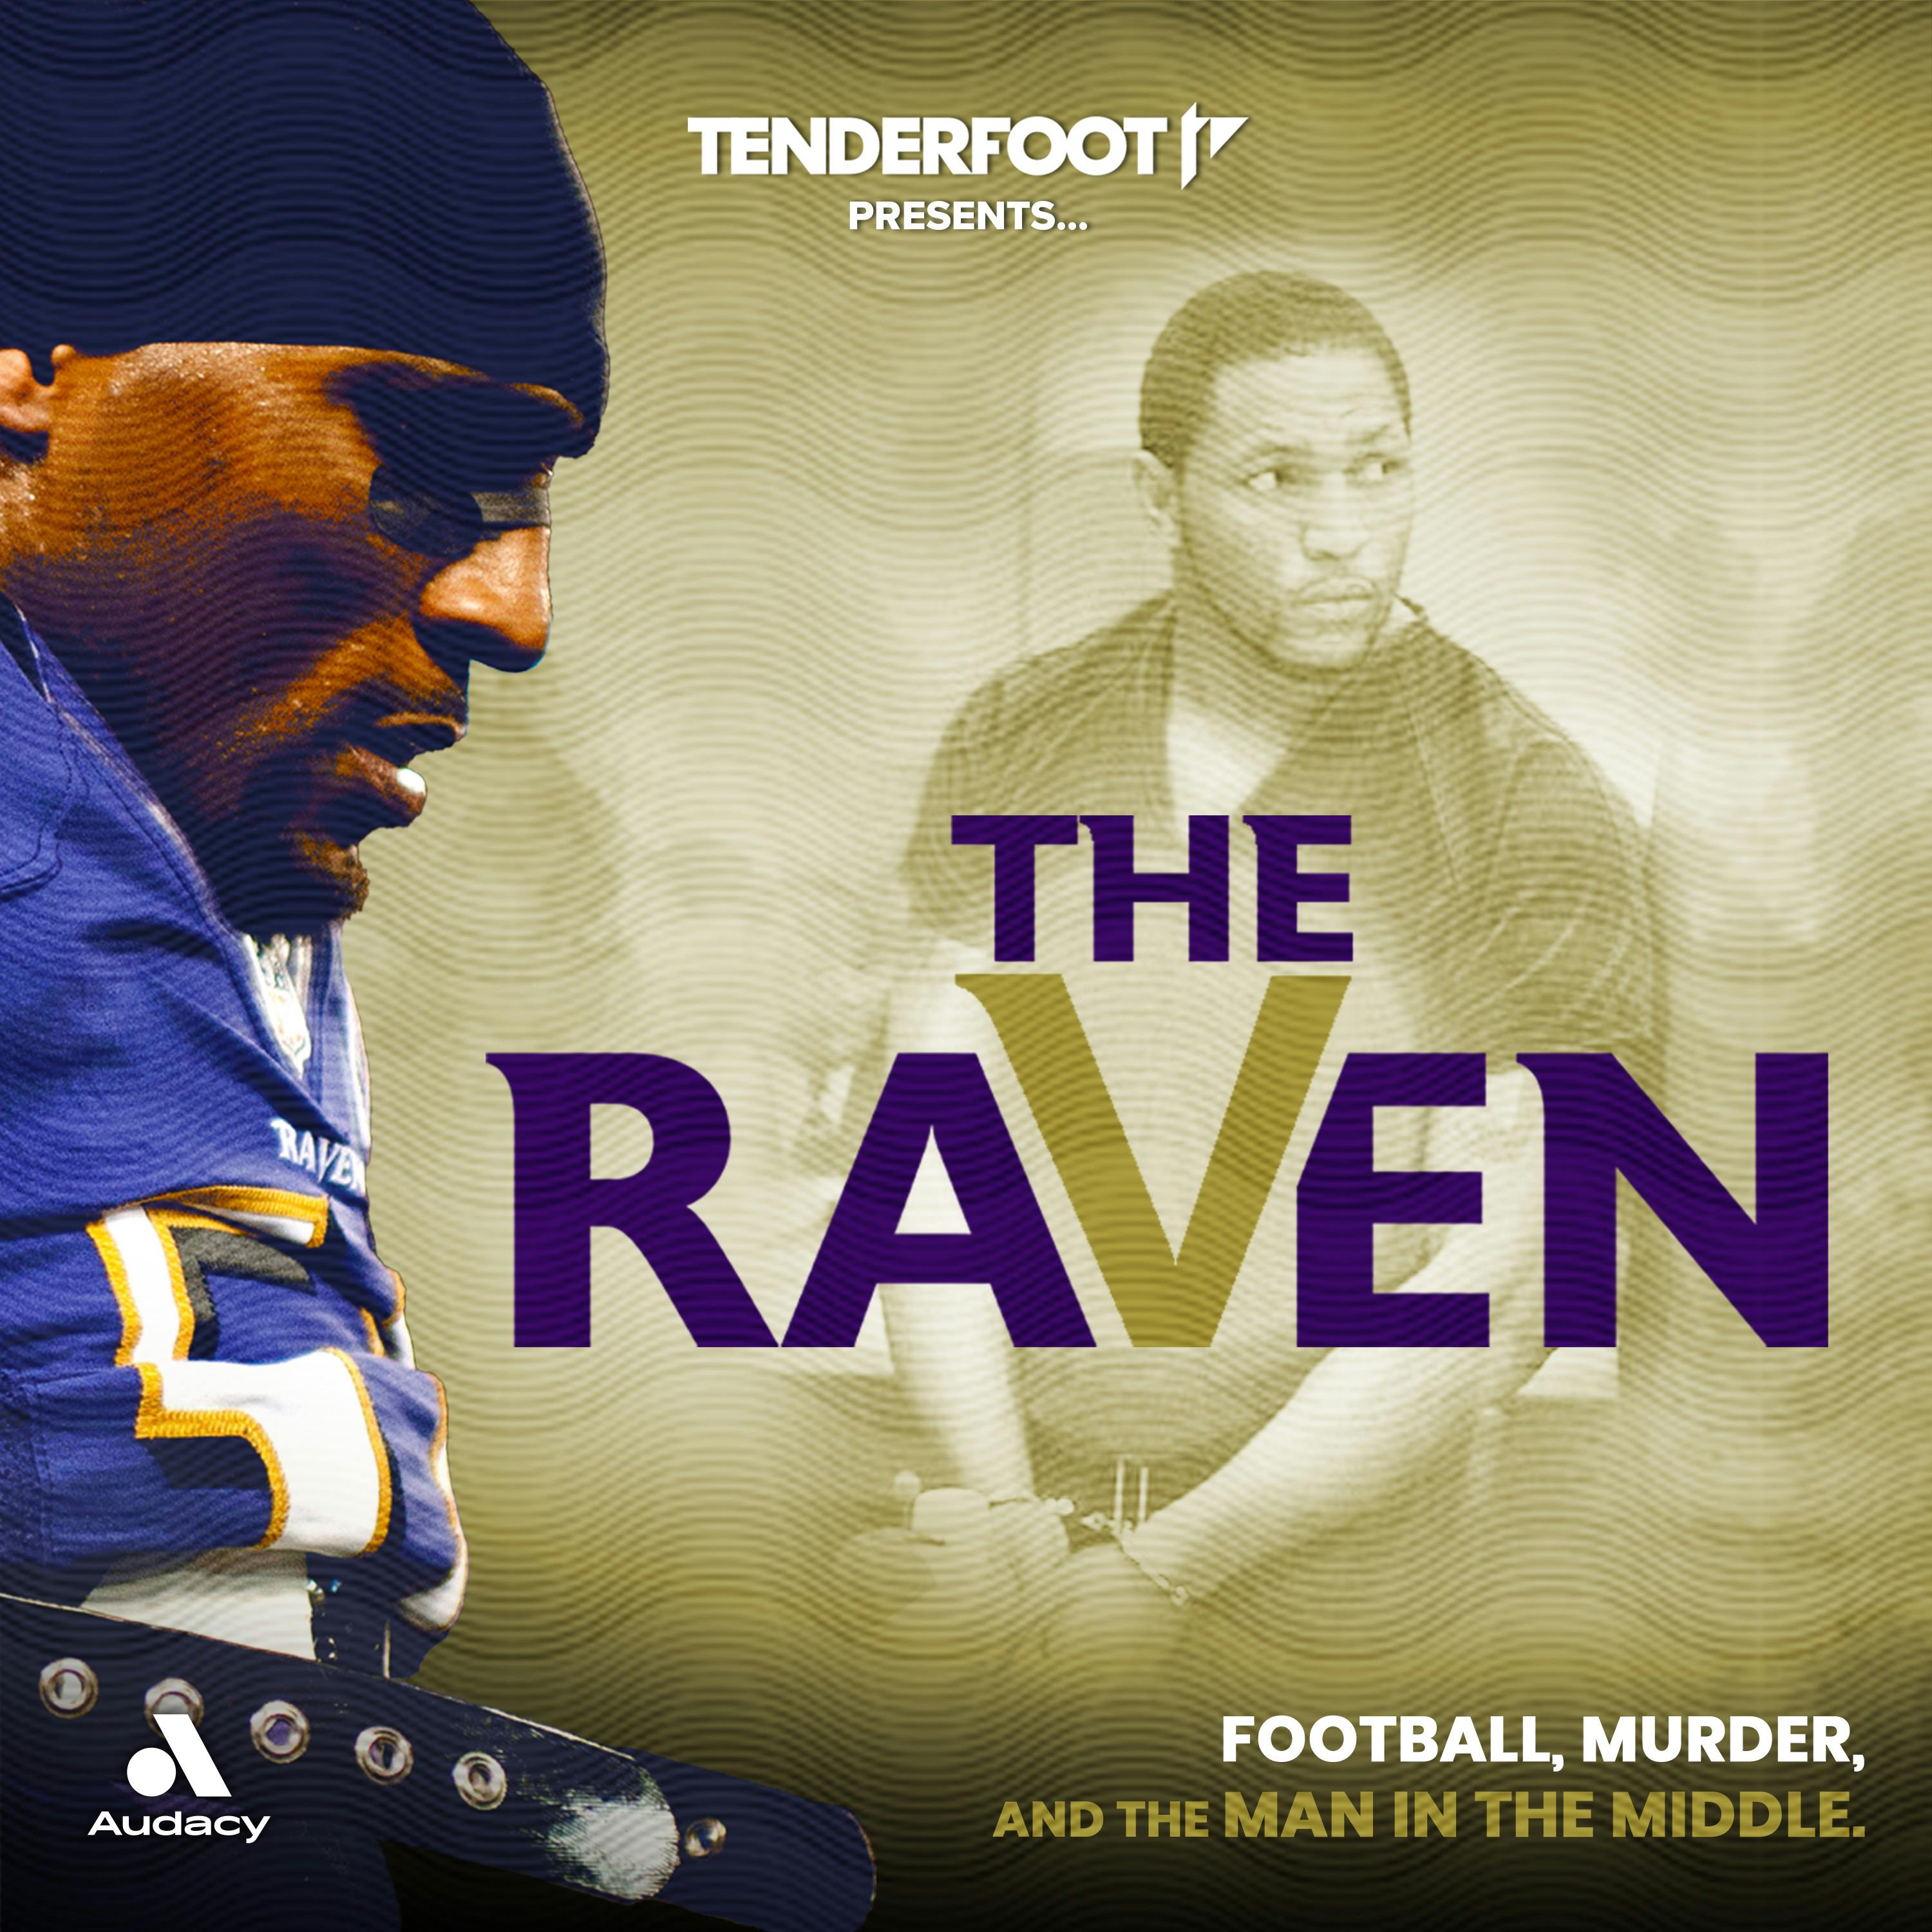 Introducing ”The Raven”